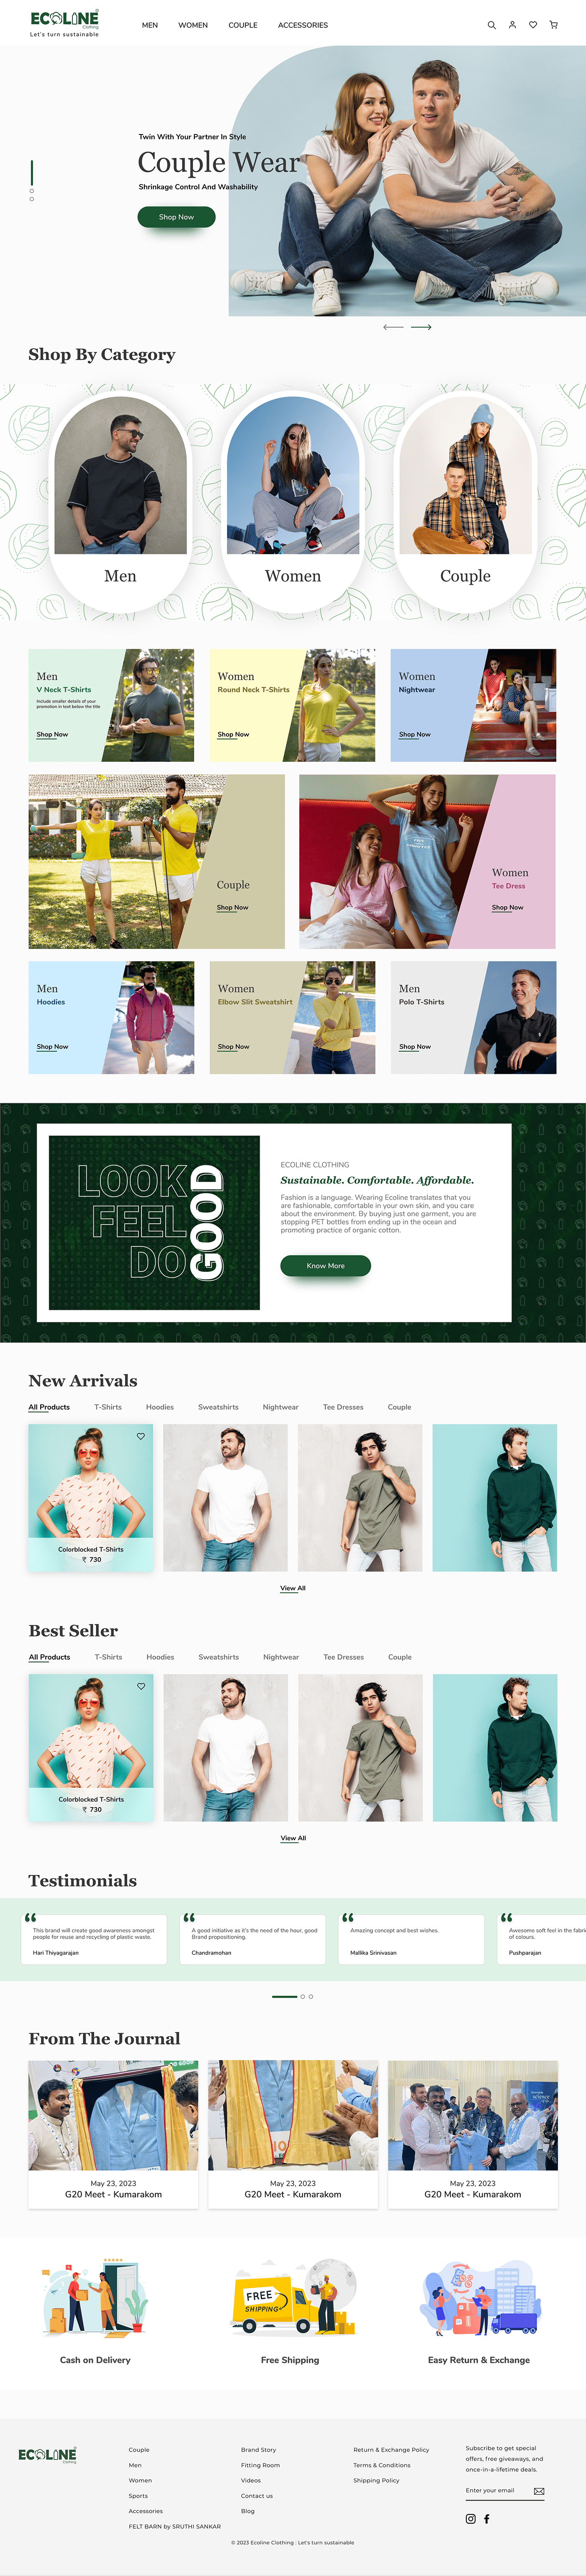 redesign redesign website Web Design  UI/UX ui design user interface landing page Ecommerce Clothing ecofriendly